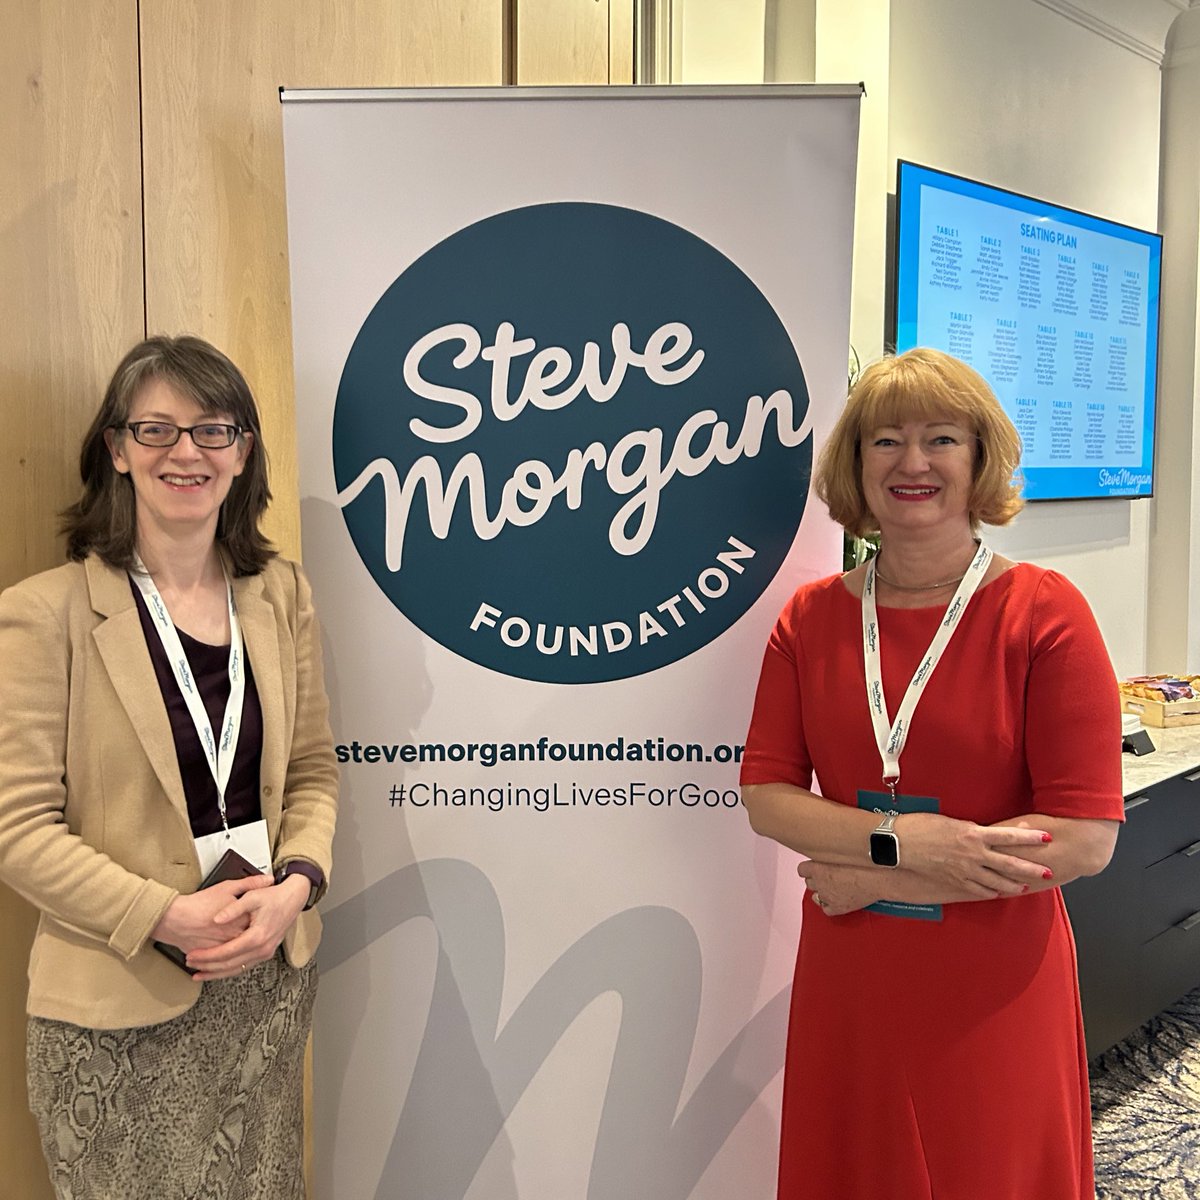 Delighted to be at the @stevemorganfdn #changinglivesforgood conference, representing the #type1diabetesgrandchallenge with @KarenFAddington and @ctmarshallceo, who are giving one of this morning’s keynote talks